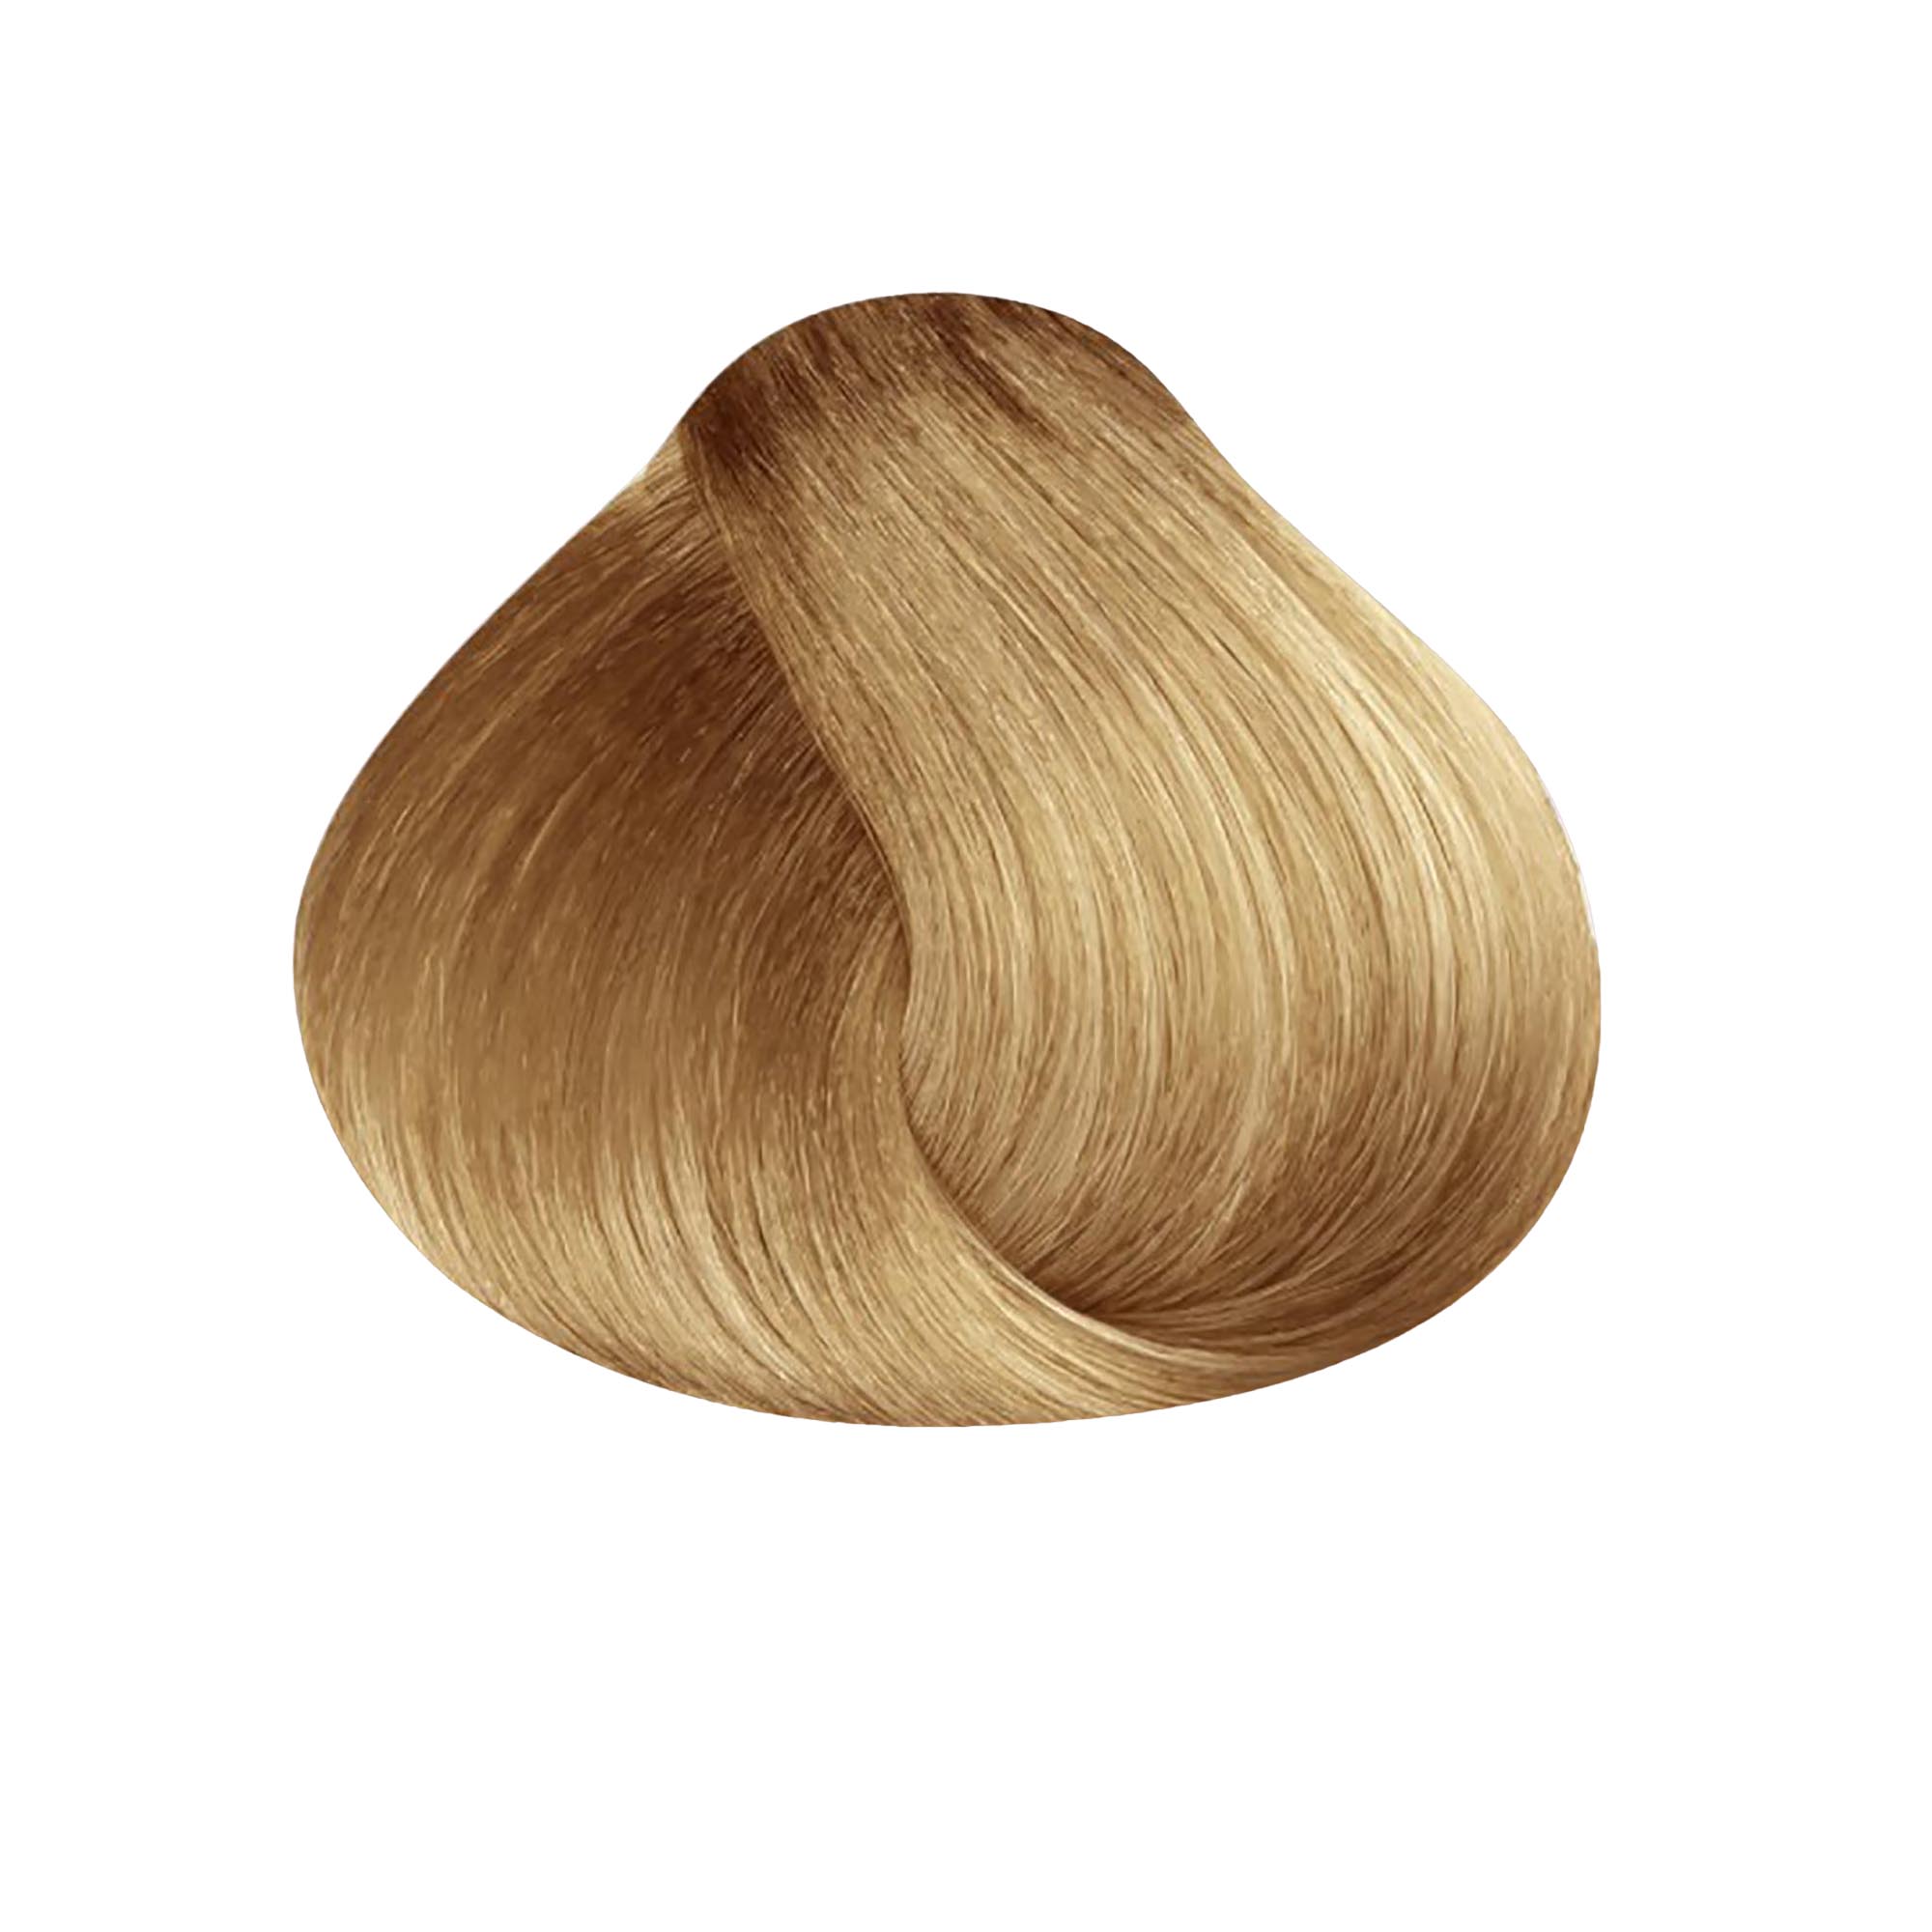 Satin Professional Hair Color / 9G Very Light Golden Blonde / Swatch